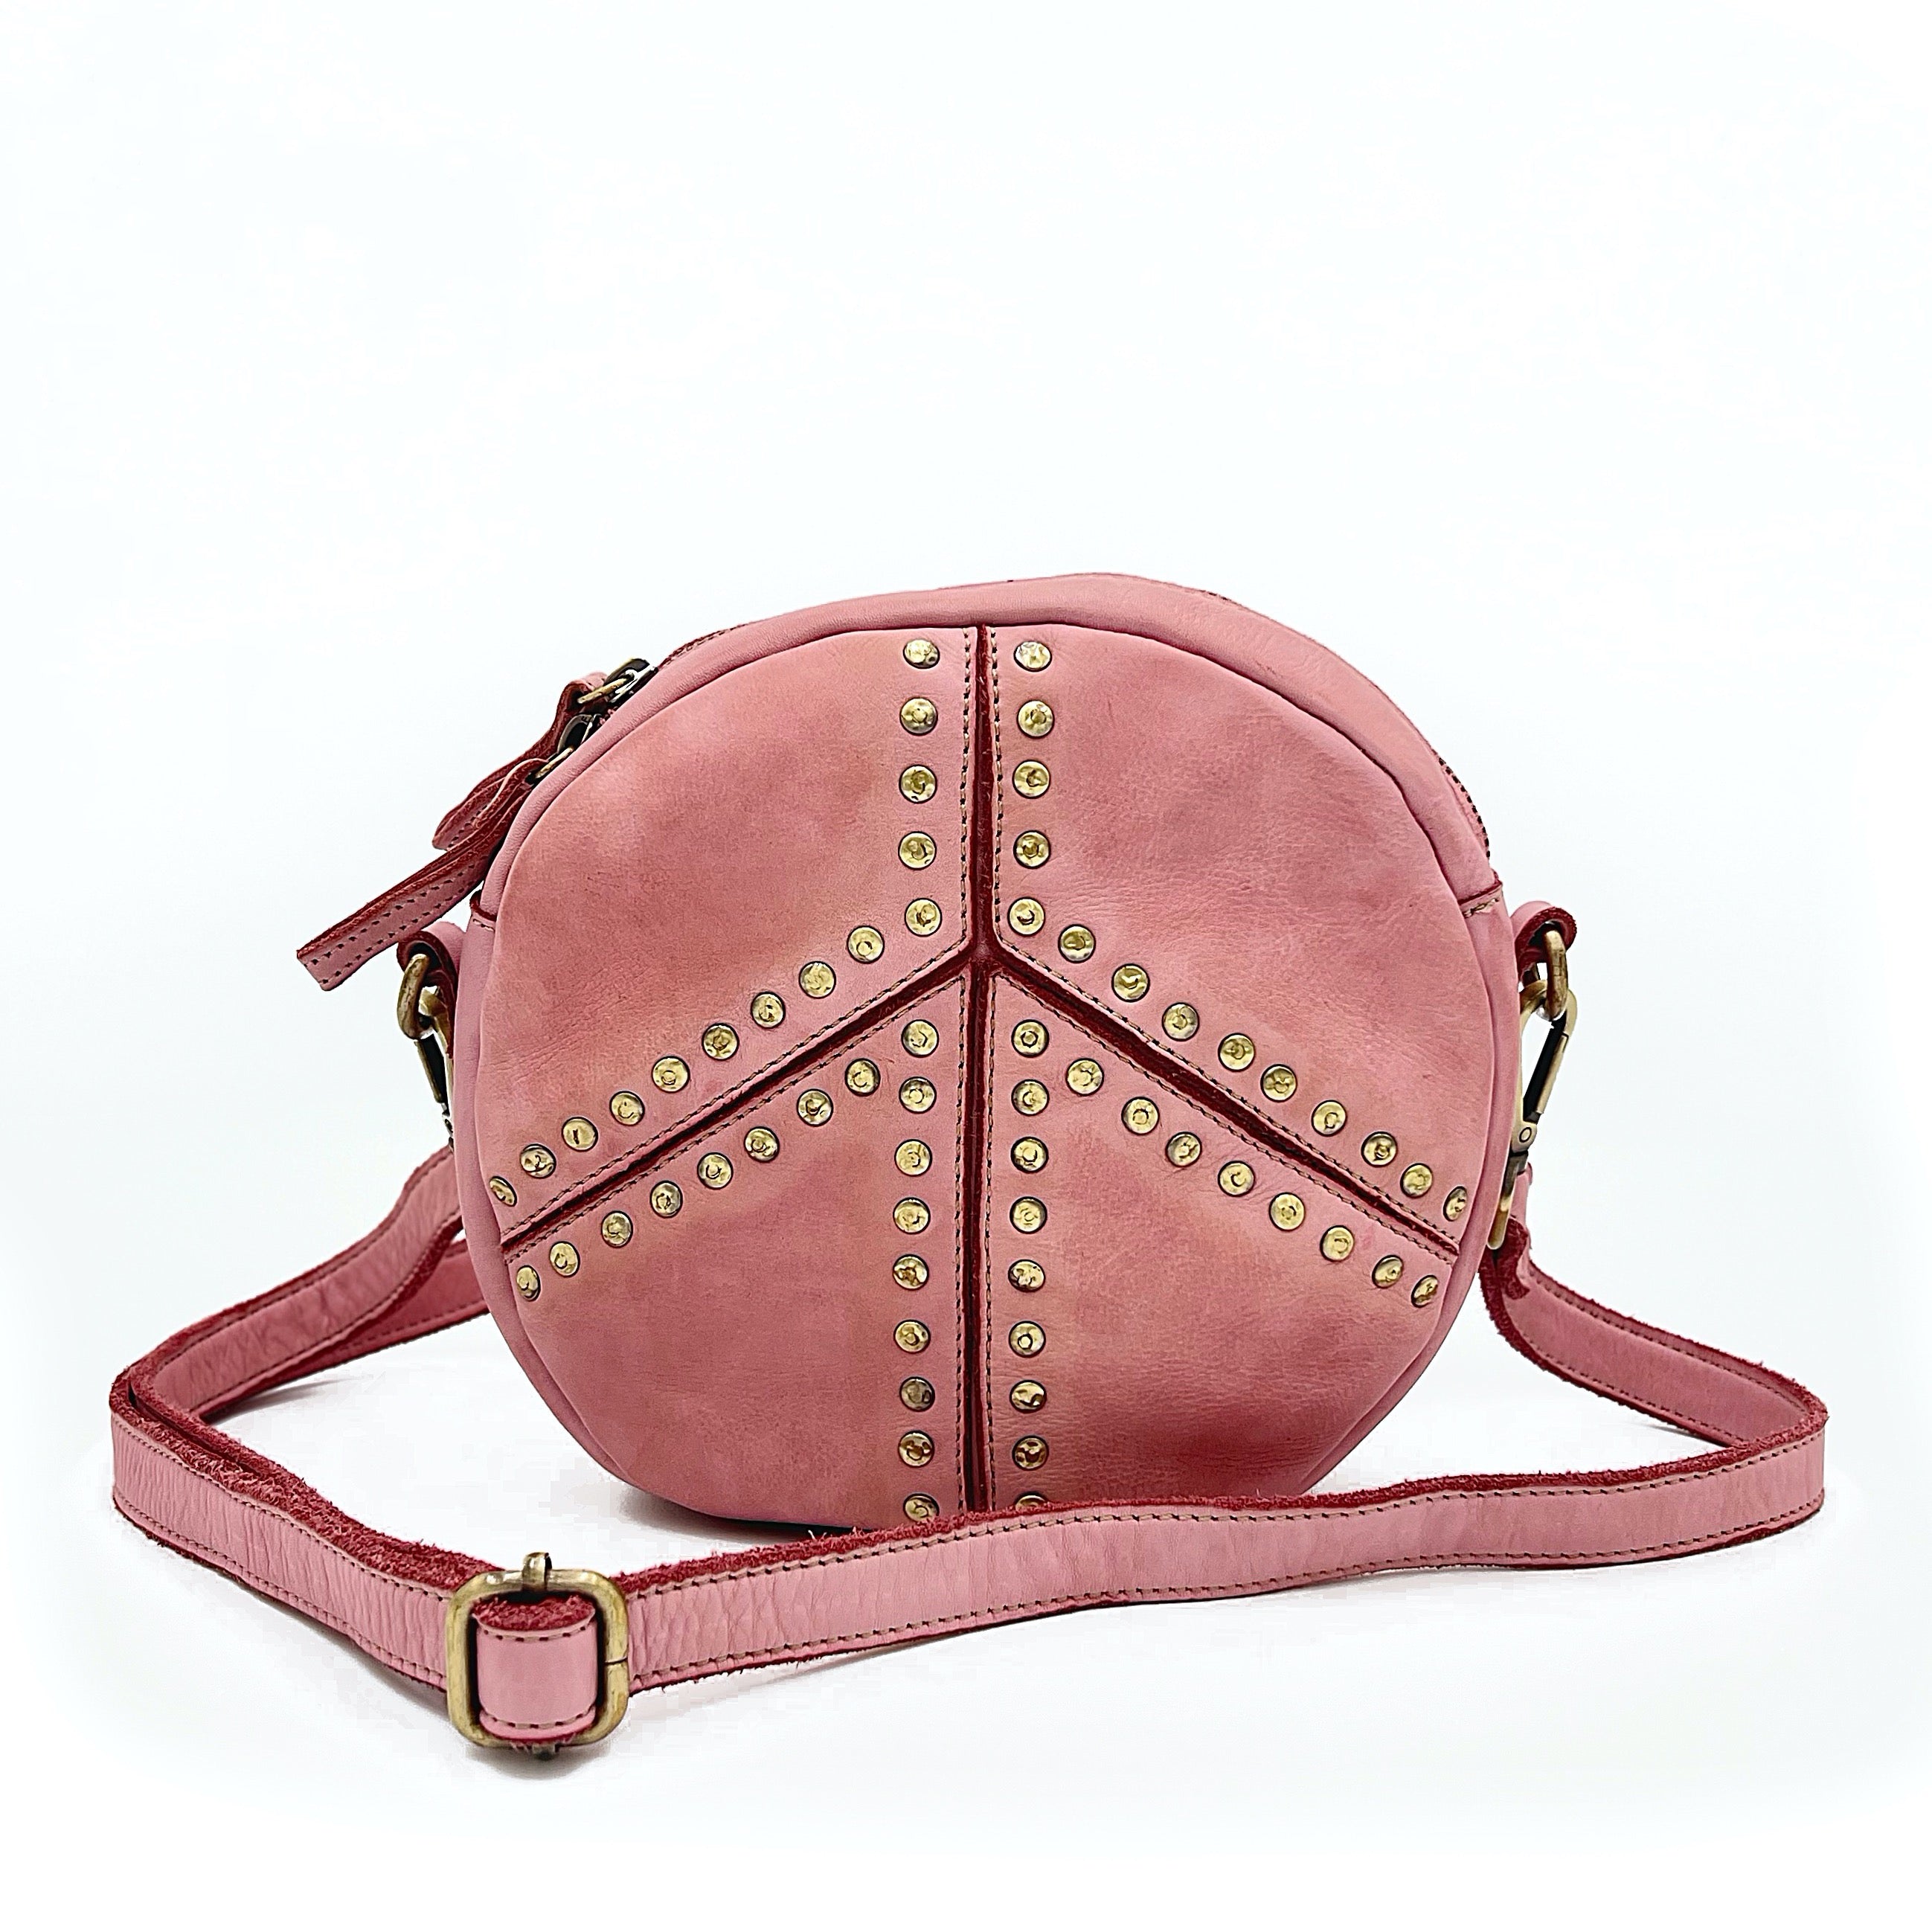 Peace Bag in Blush Pink